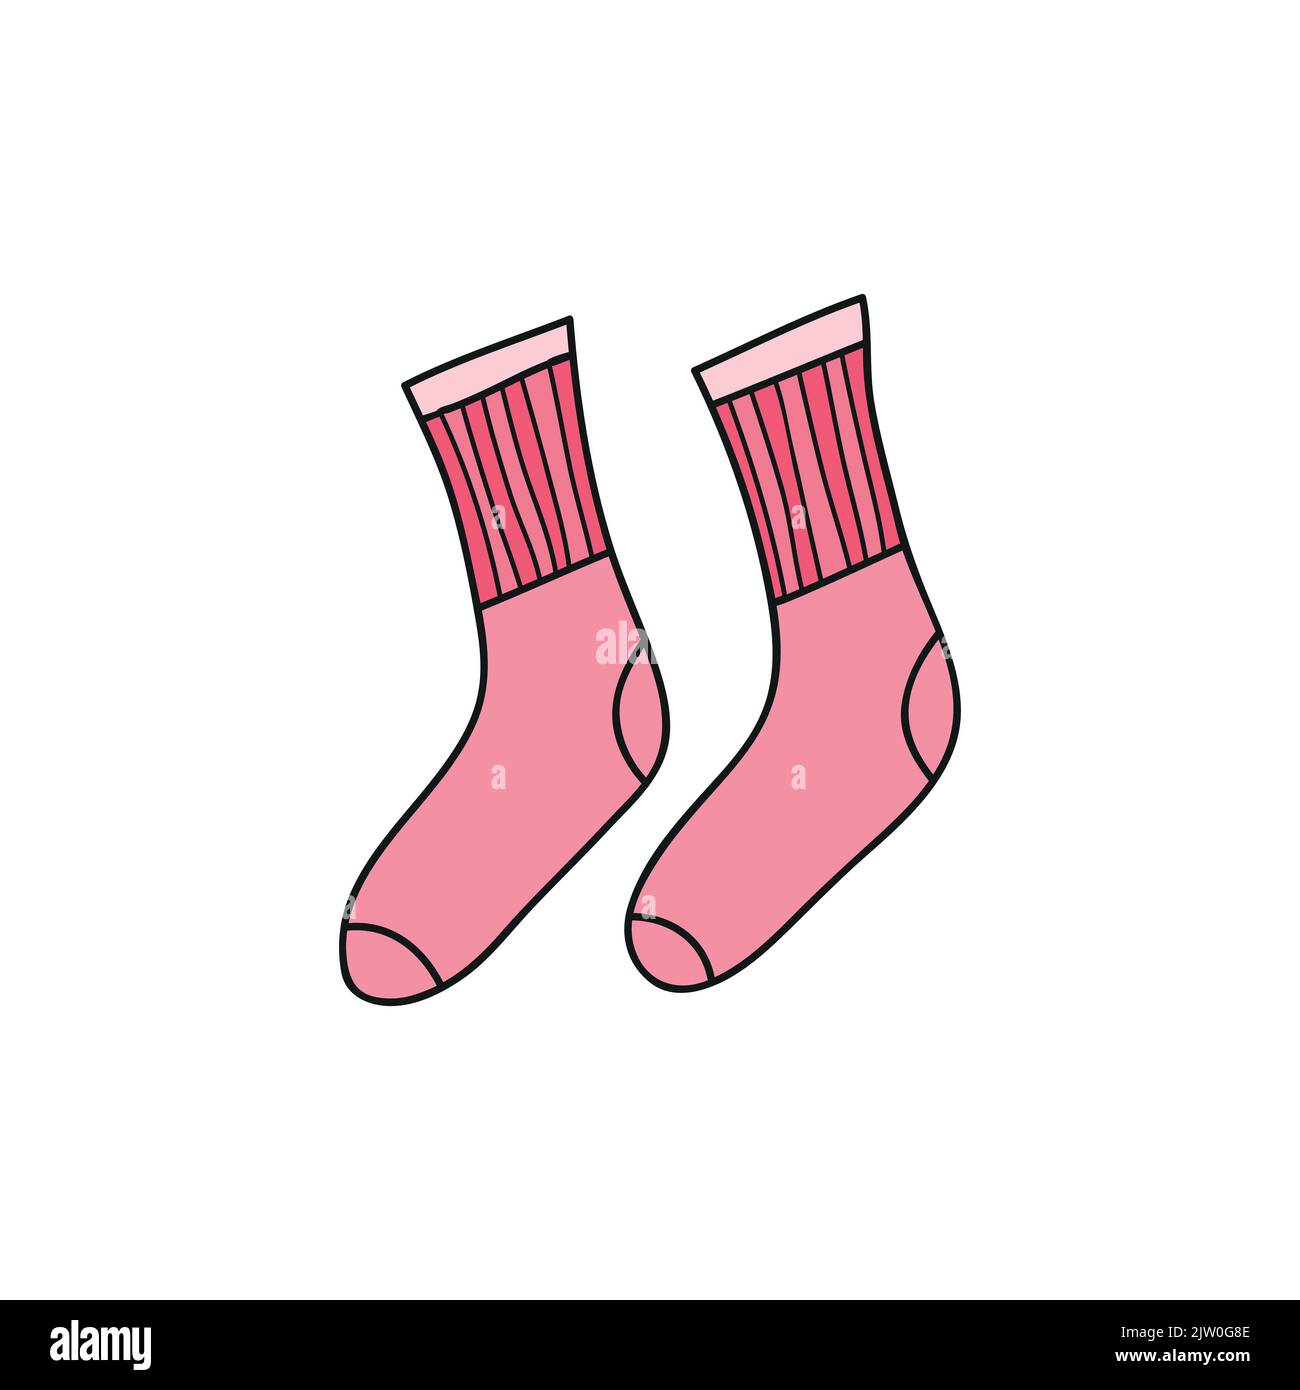 Hand drawn colored pink long socks isolated on white background. Stock Vector